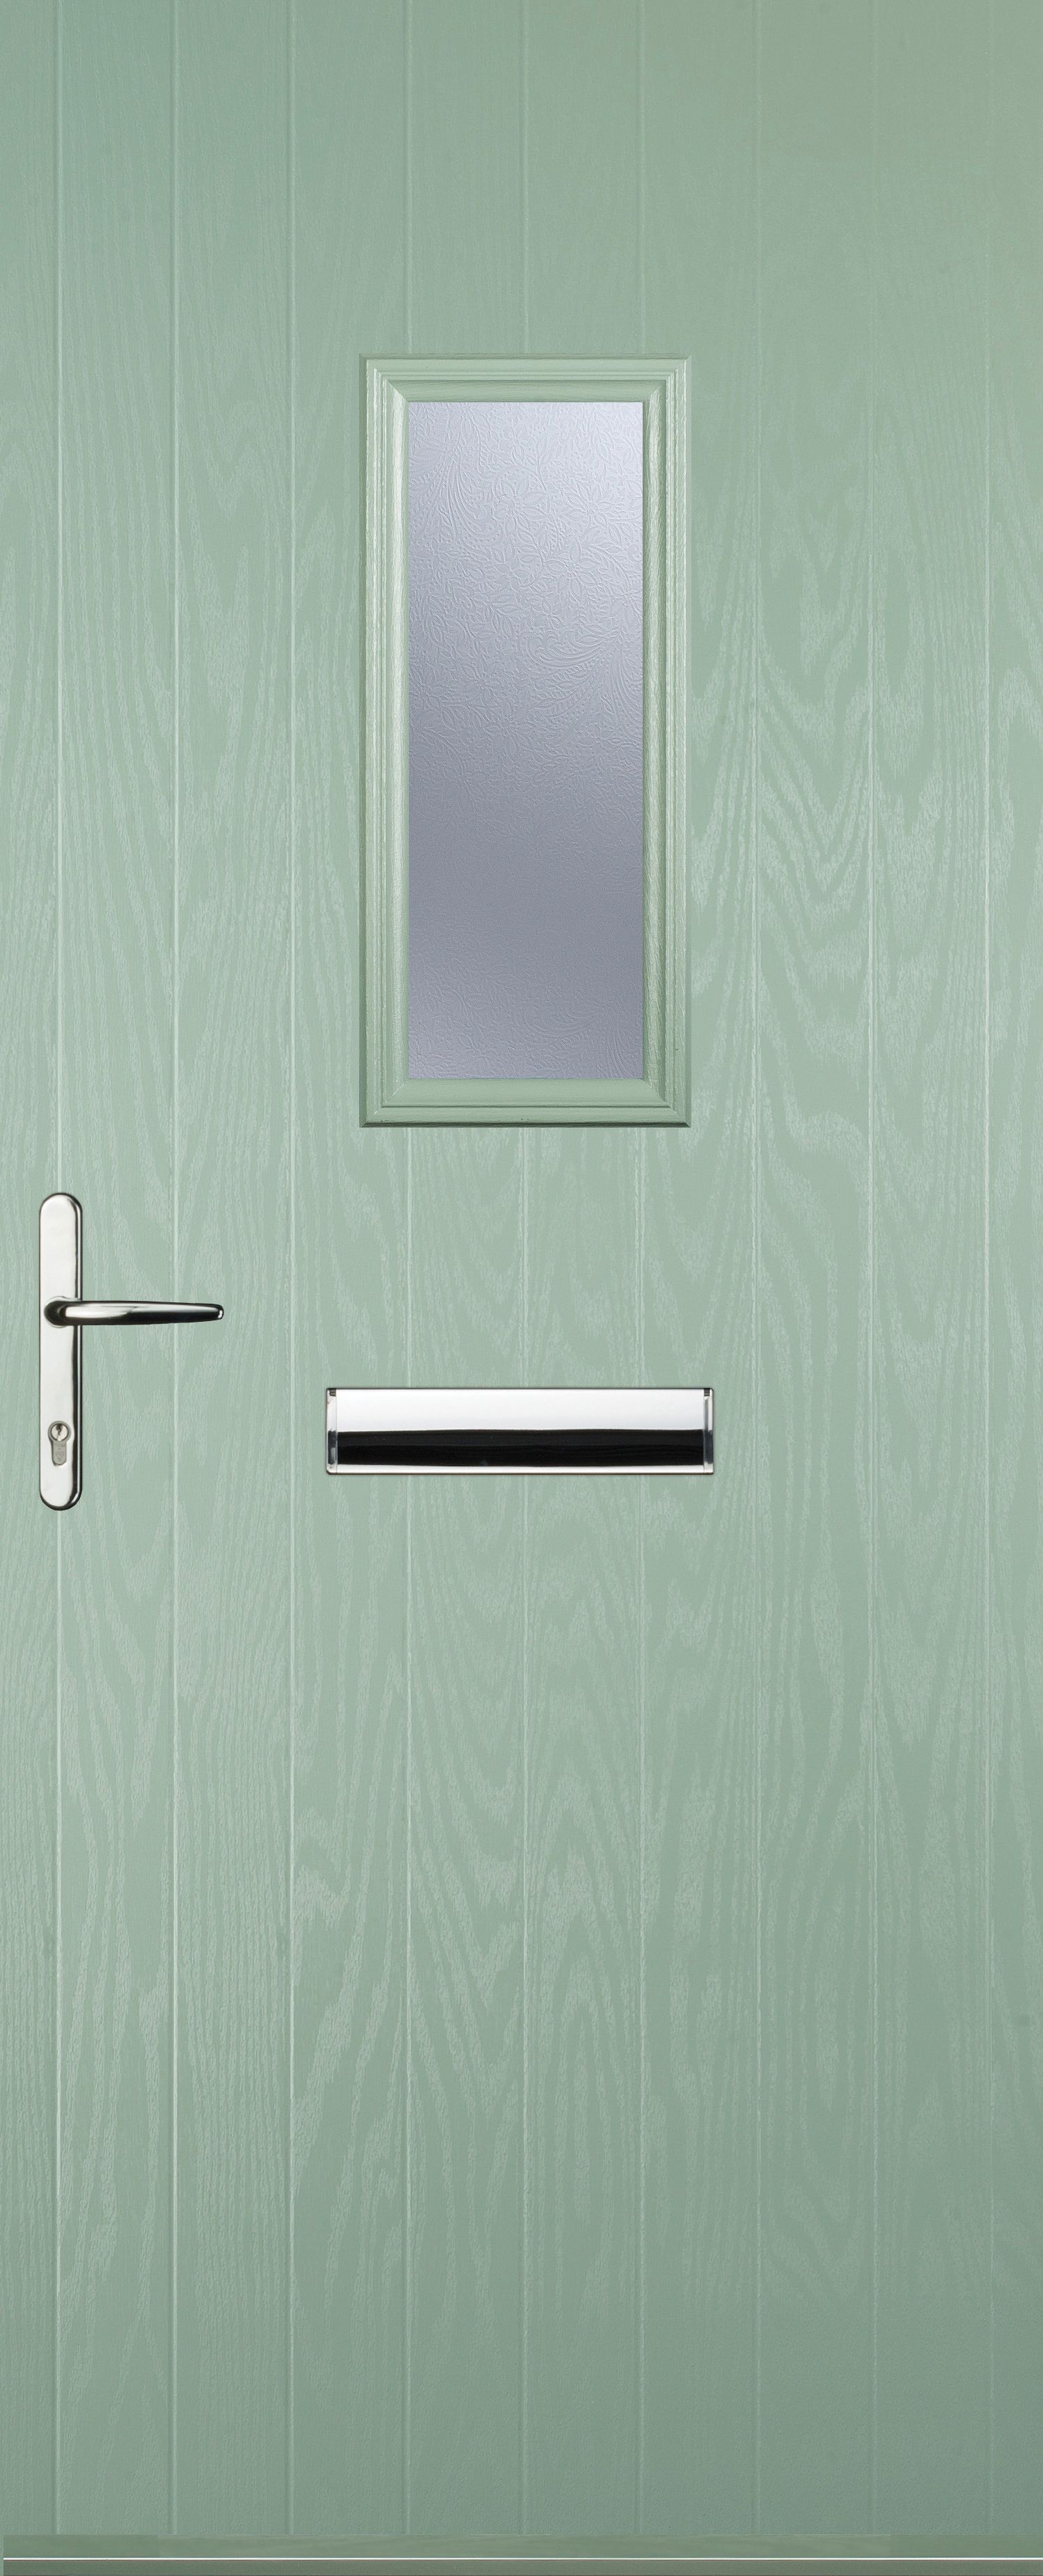 Image of Euramax 1 Square Right Hand Chartwell Green Composite Door - 880 x 2100mm